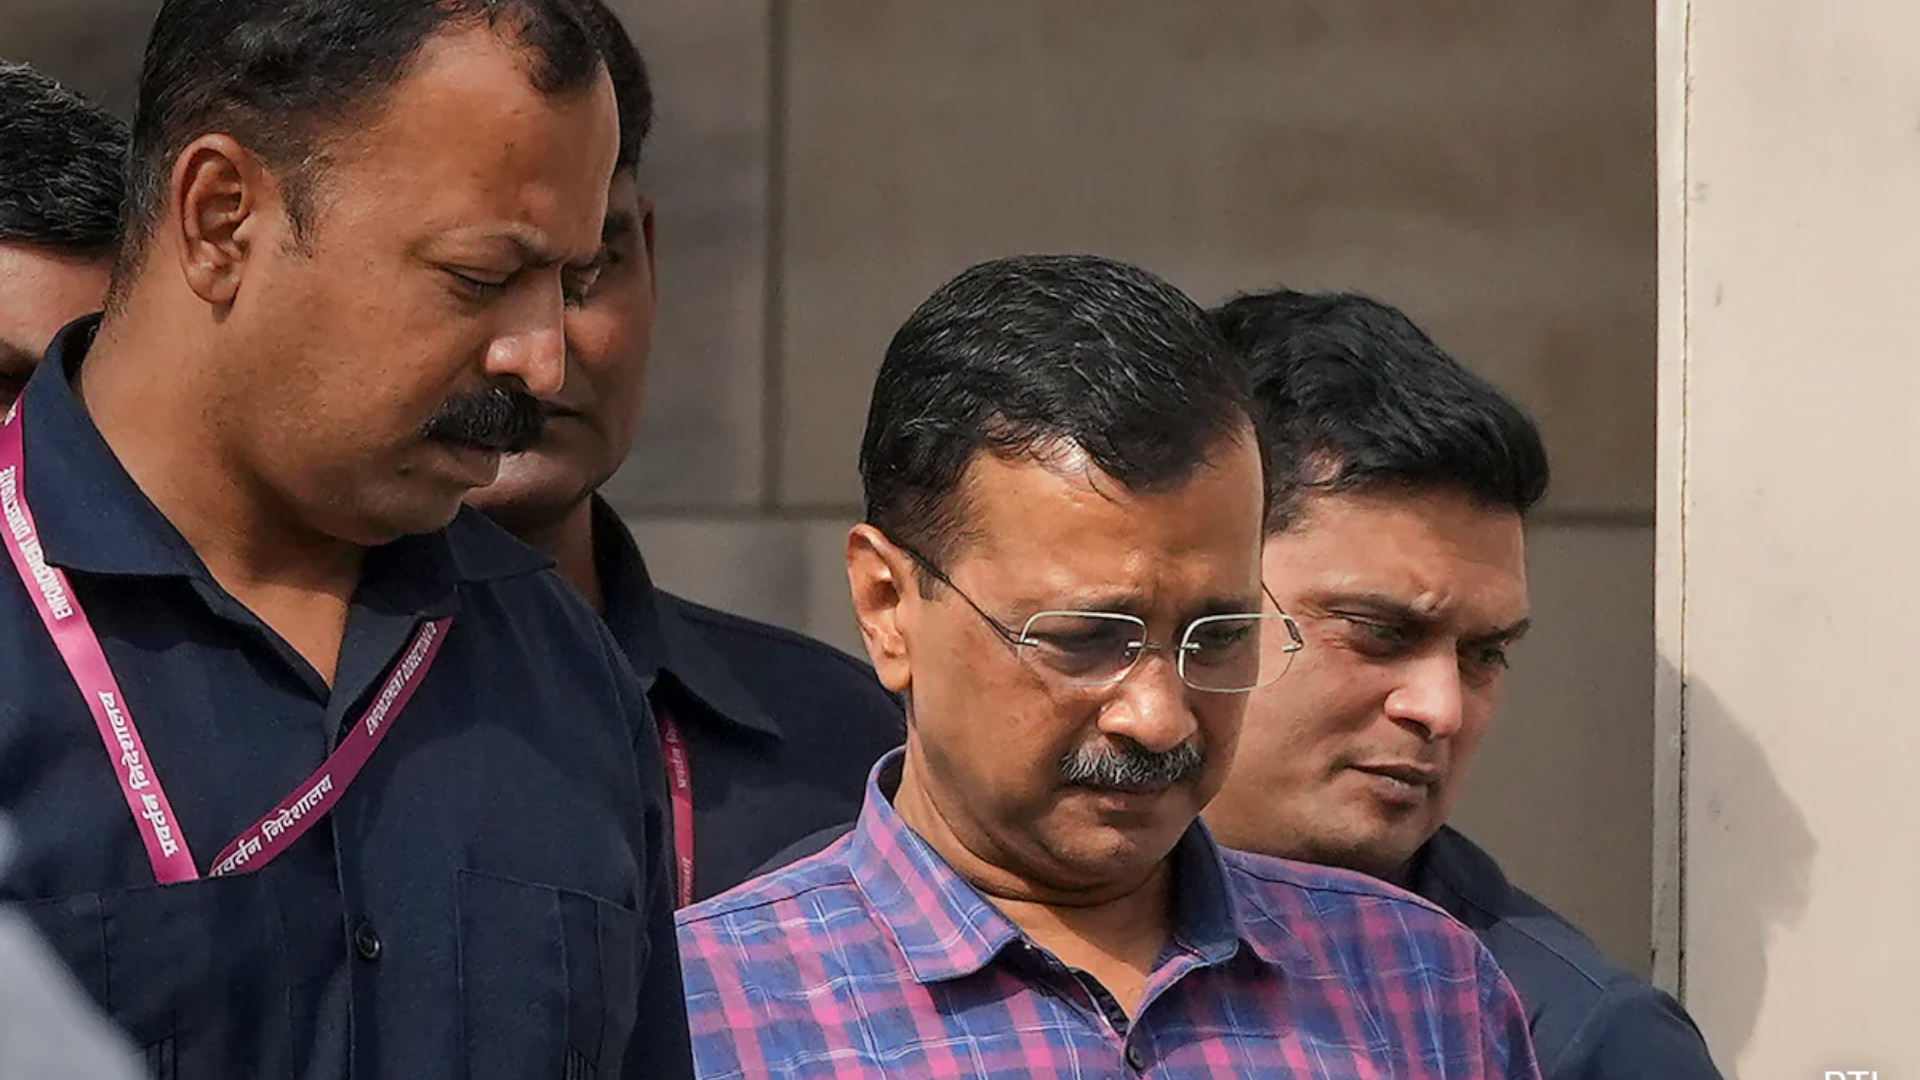 Delhi Chief Minister Arvind Kejriwal Receives Insulin at Tihar Jail After Blood Sugar Rise Exponentially